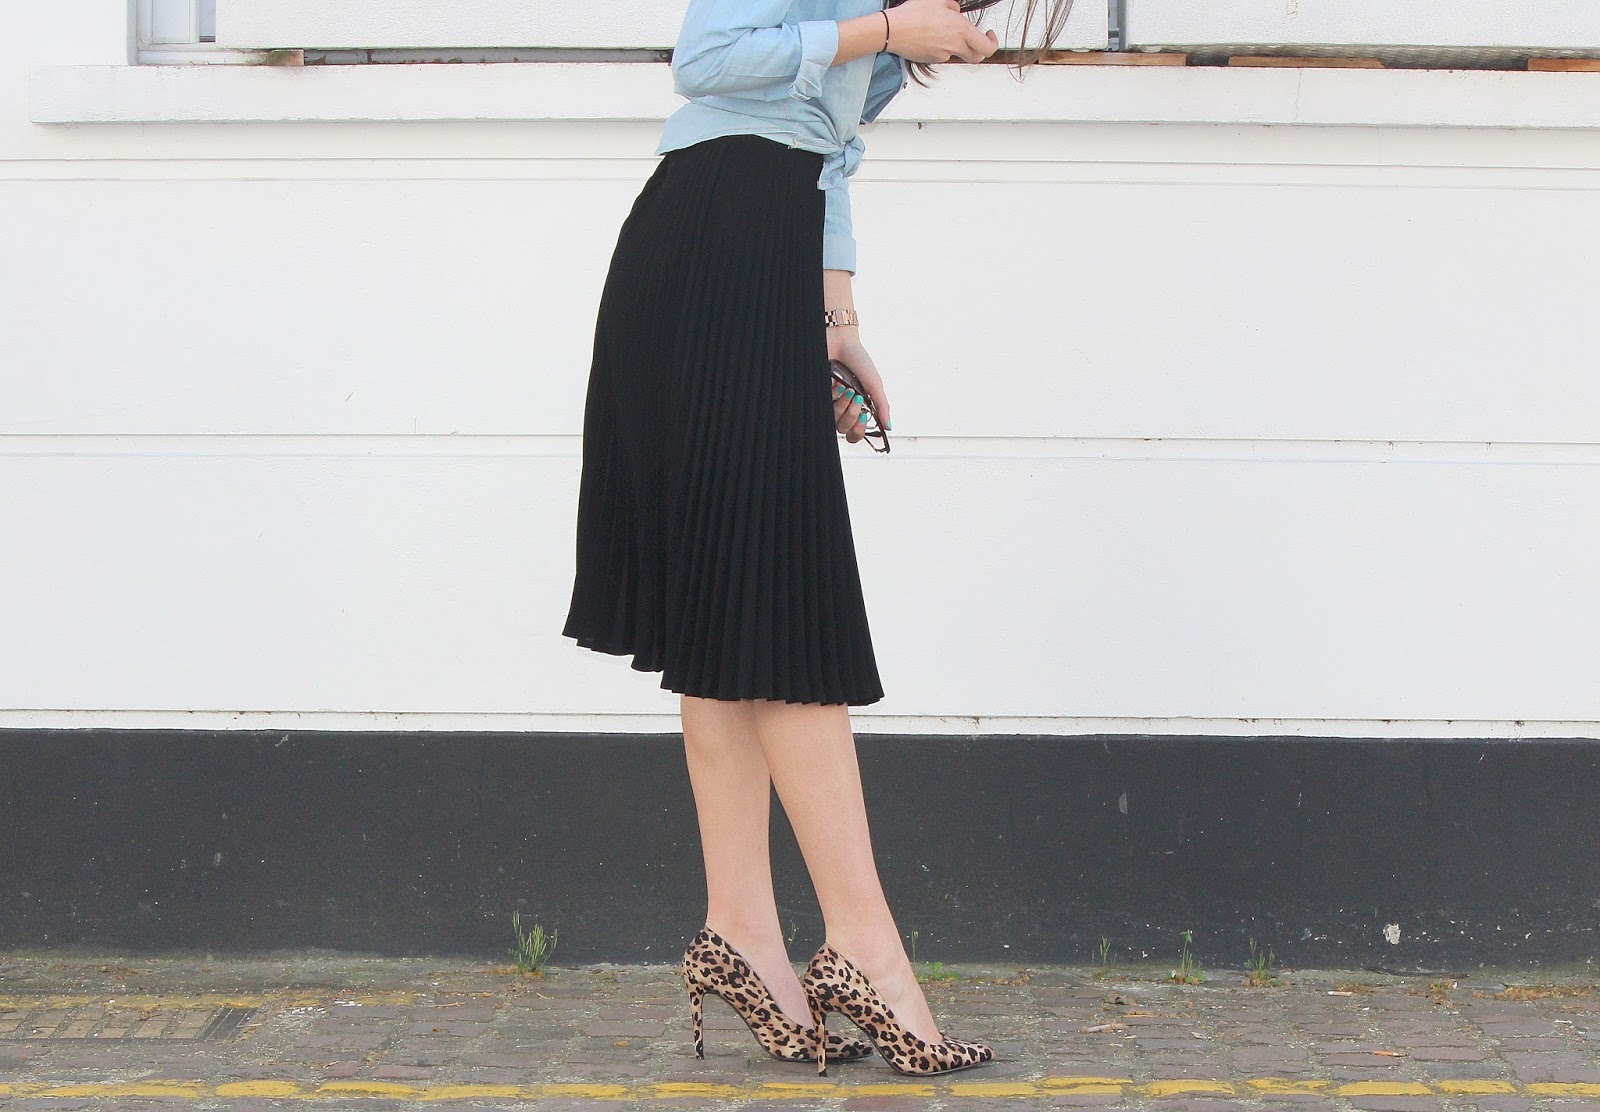 peexo fashion blogger wearing pleated midi skirt with lace bralet and denim shirt and leopard print heels in spring